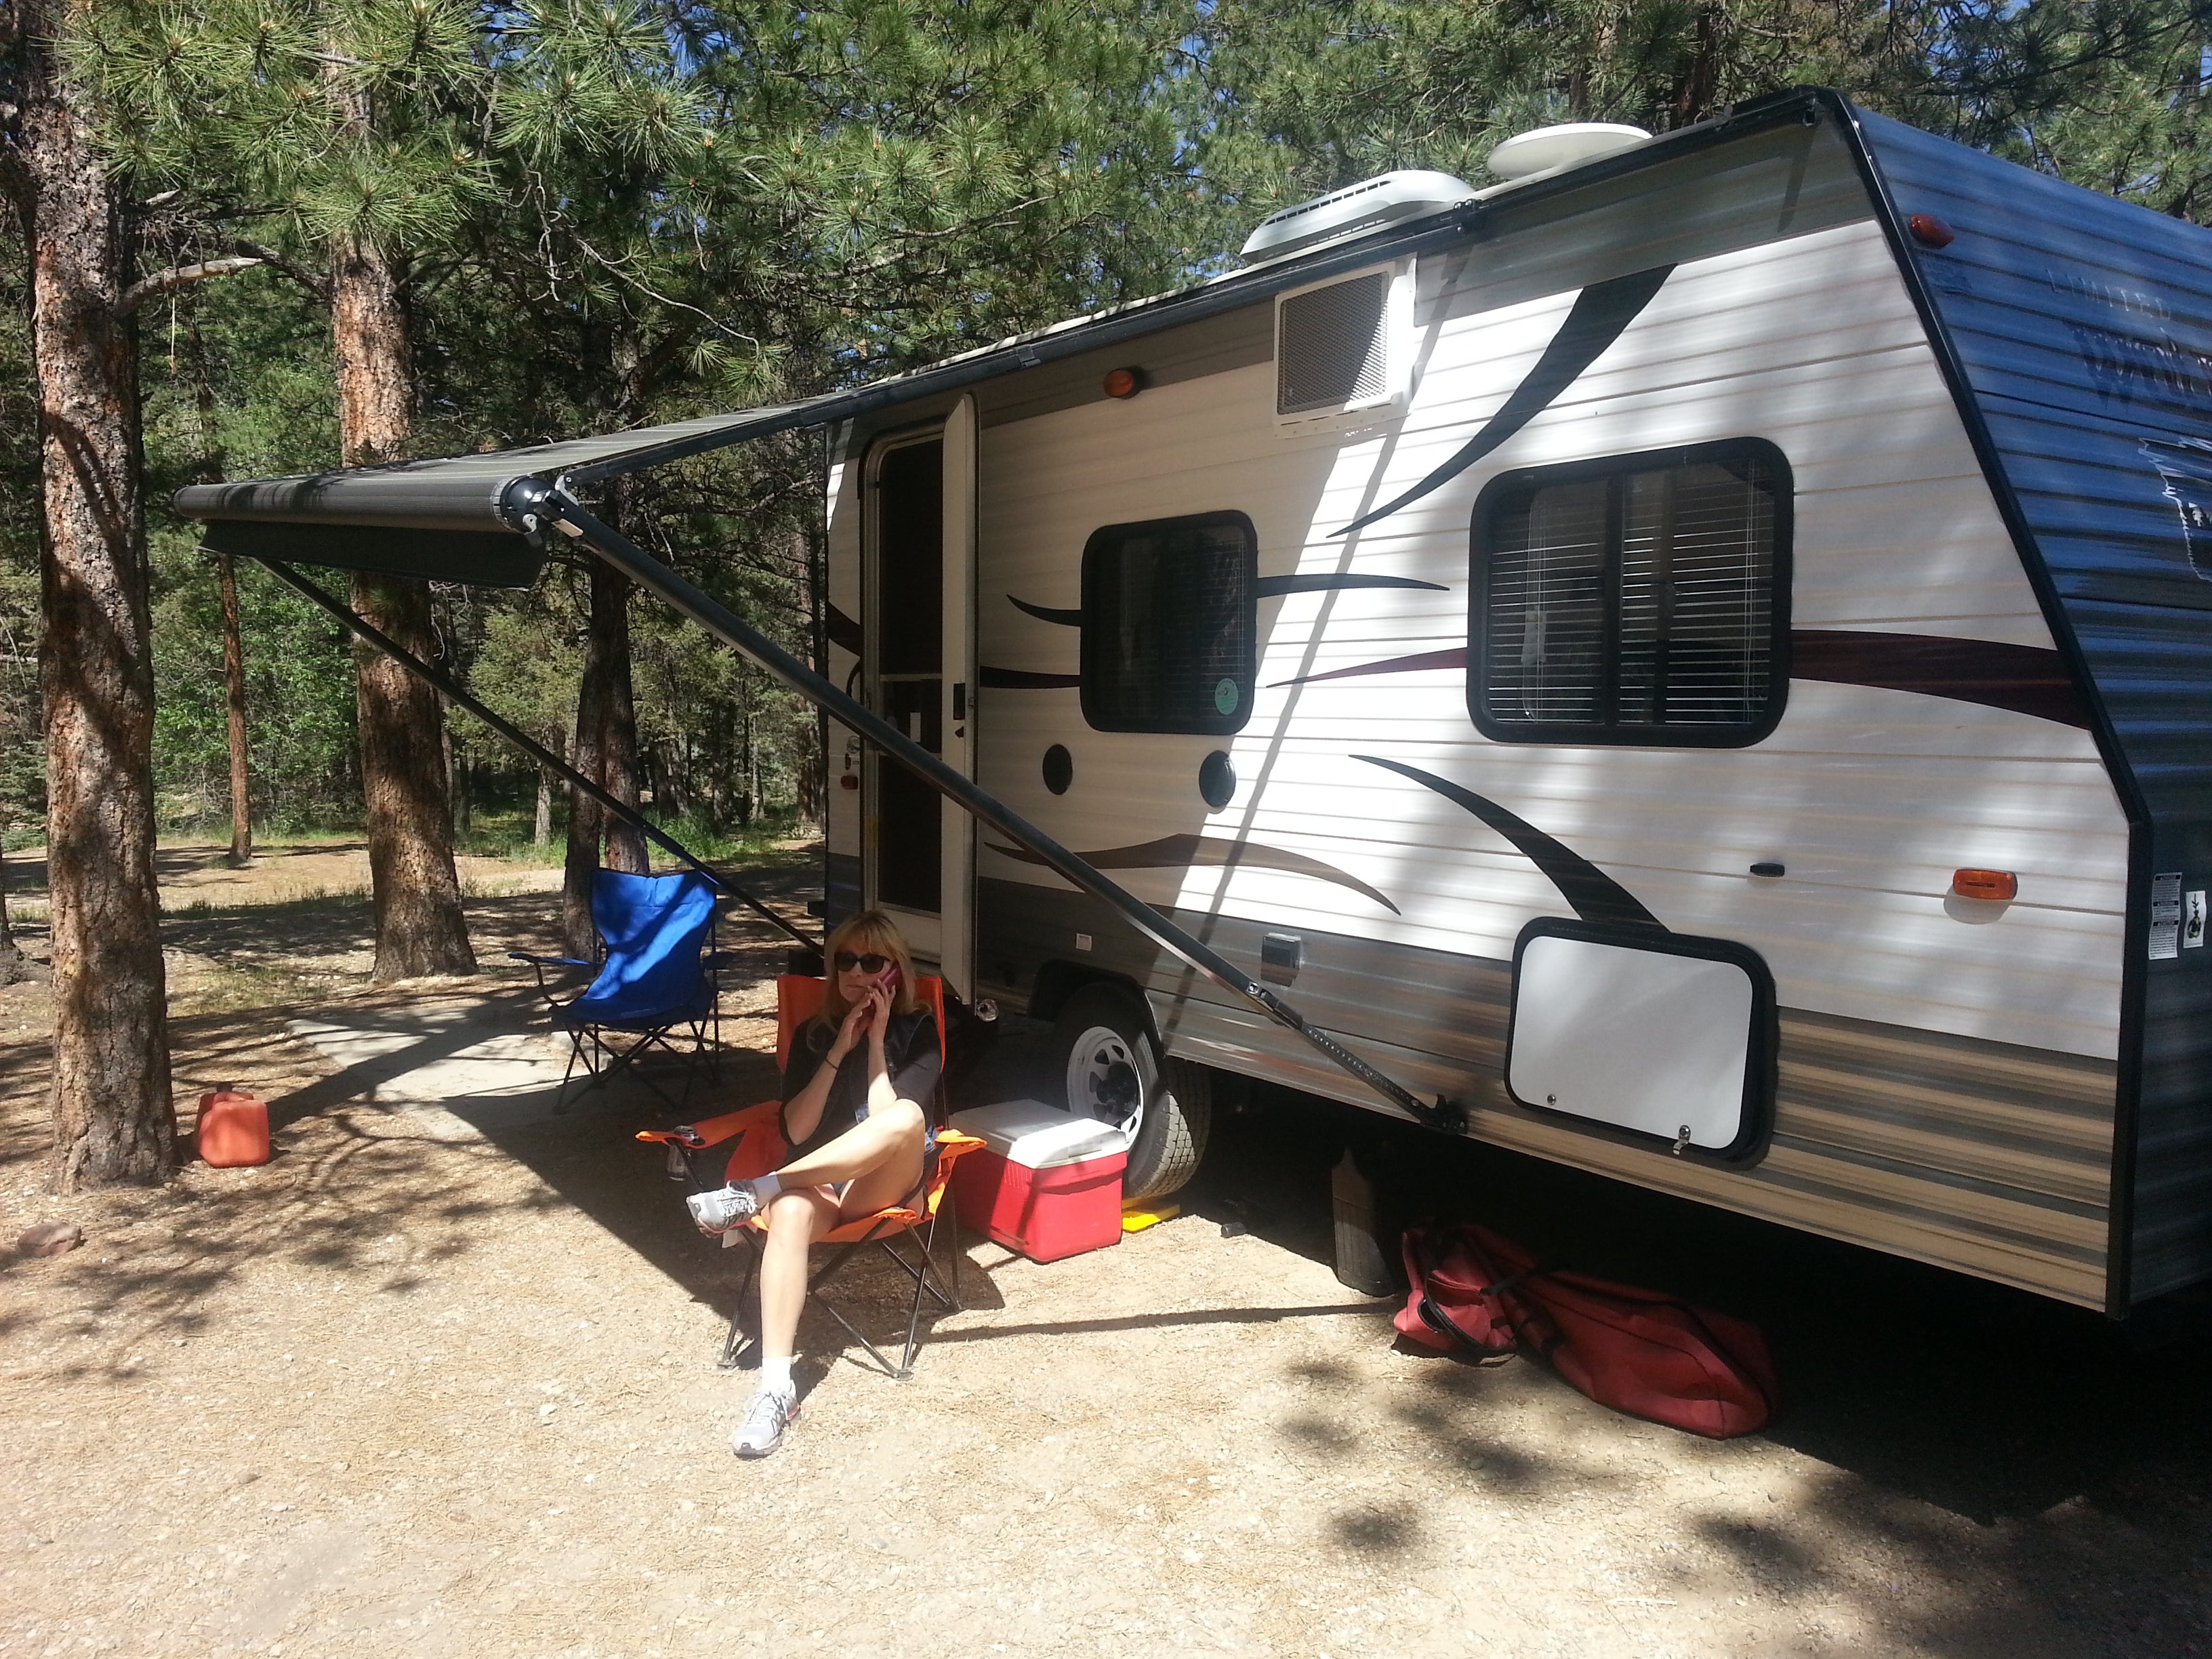 Camper submitted image from Mccrystal Campground - 4